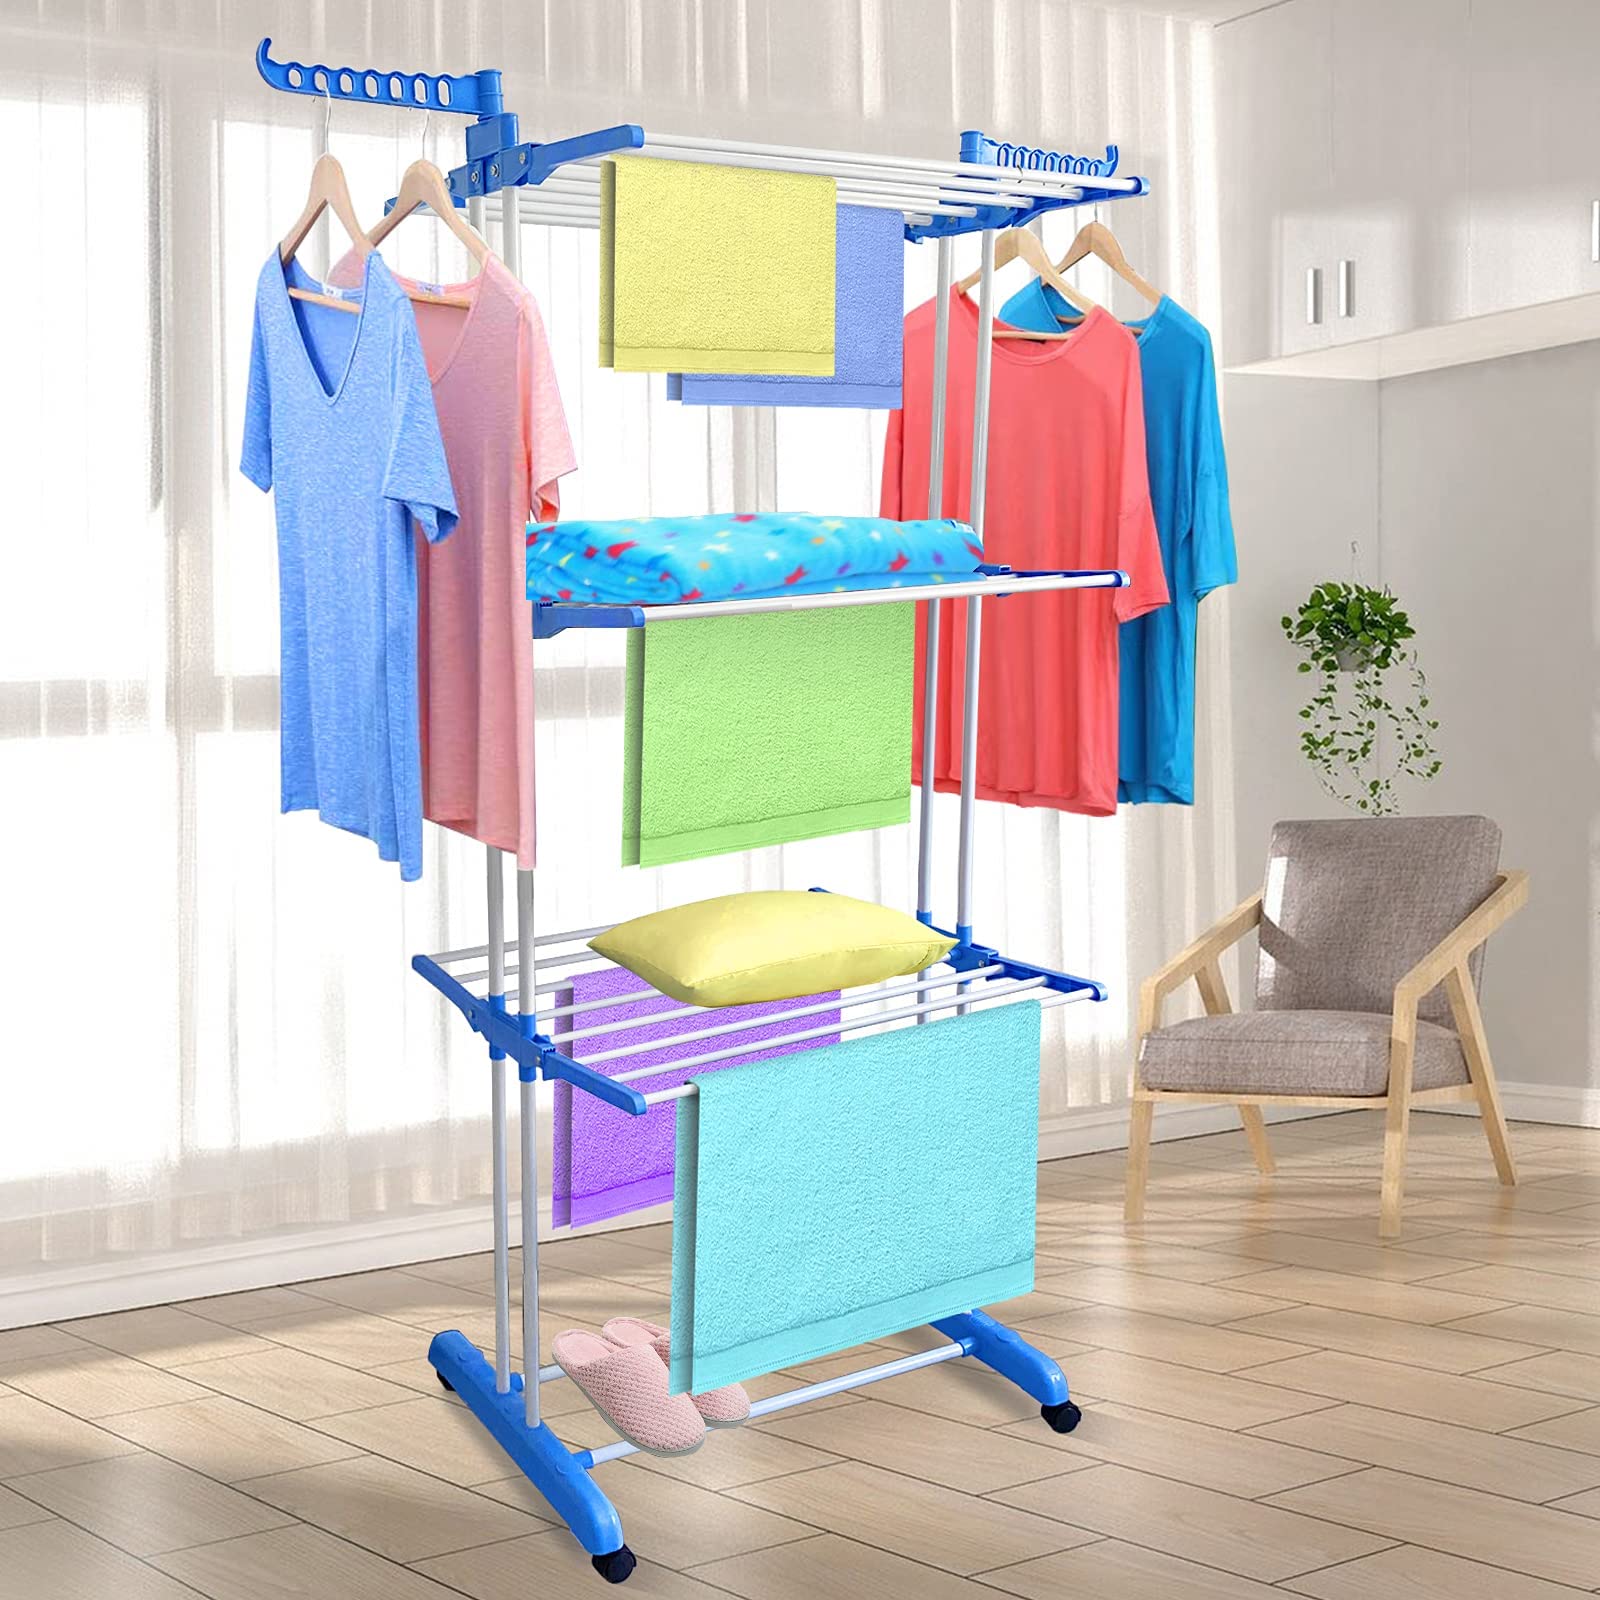 VIO Clothes Drying Rack,Foldable Clothes Hanger Adjustable Large Stainless Steel Garment Laundry Racks for Indoor Outdoor